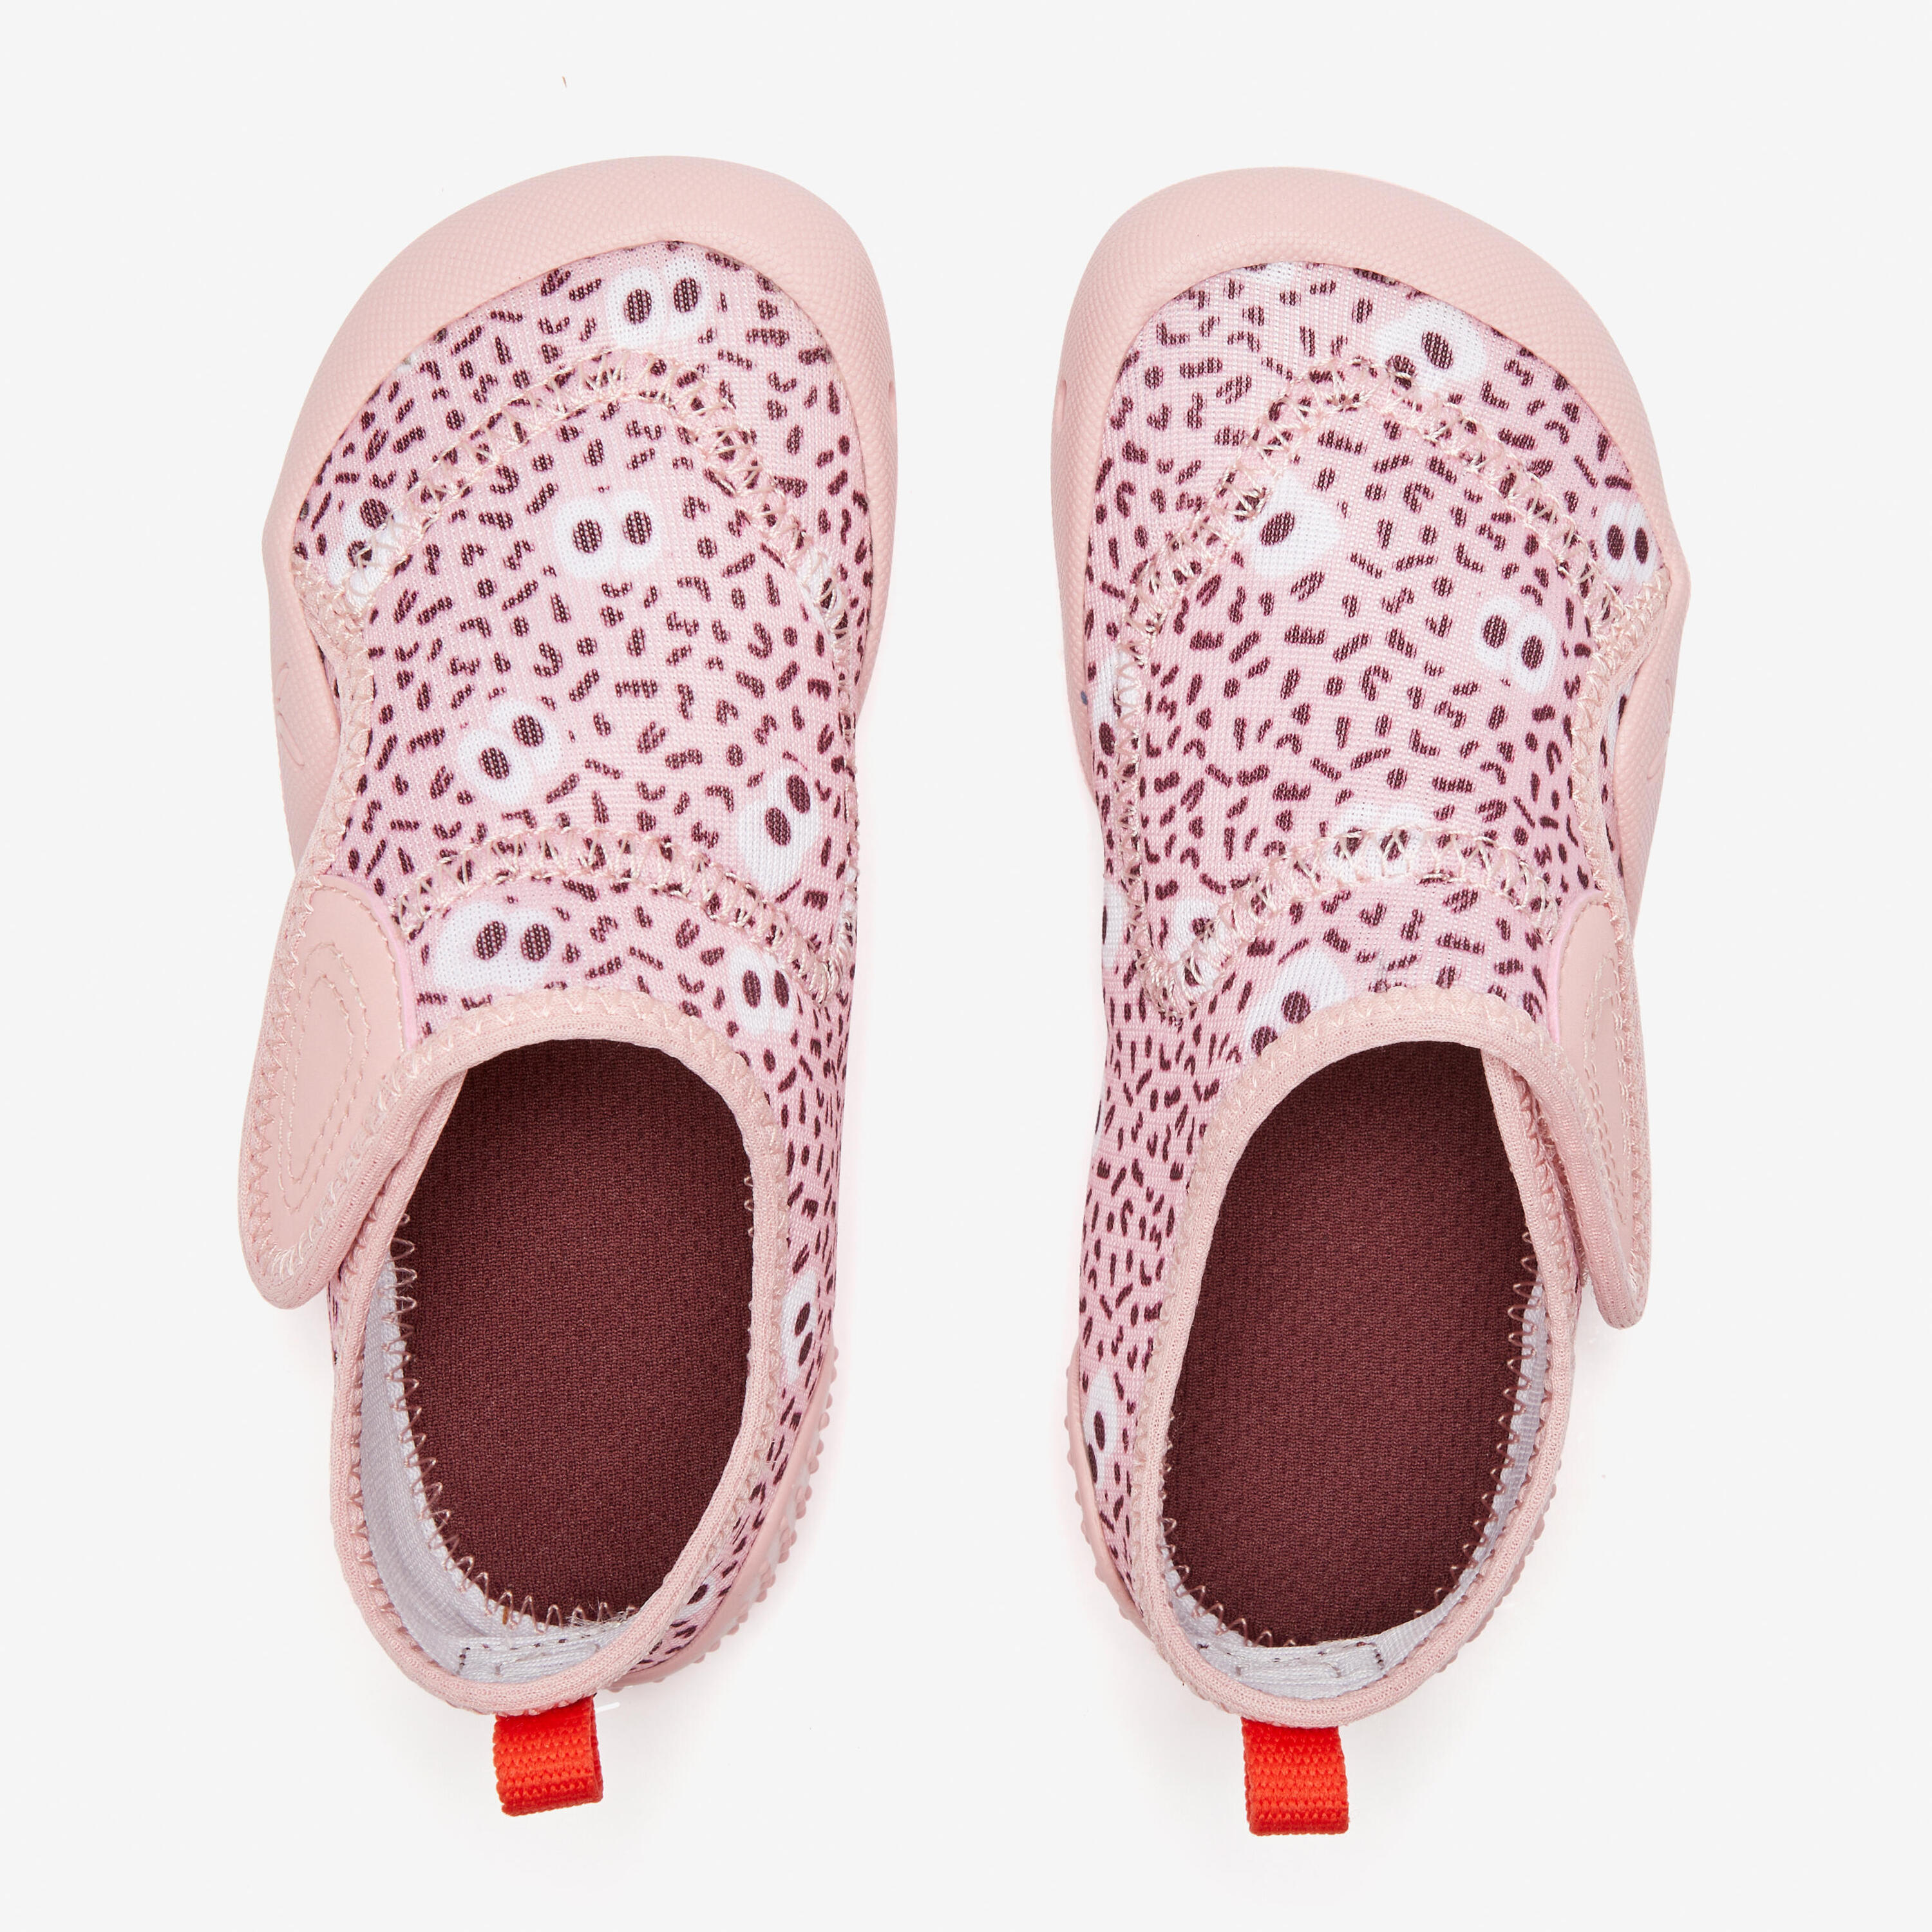 Kids' Non-Slip and Breathable Bootee - Patterns 8/8